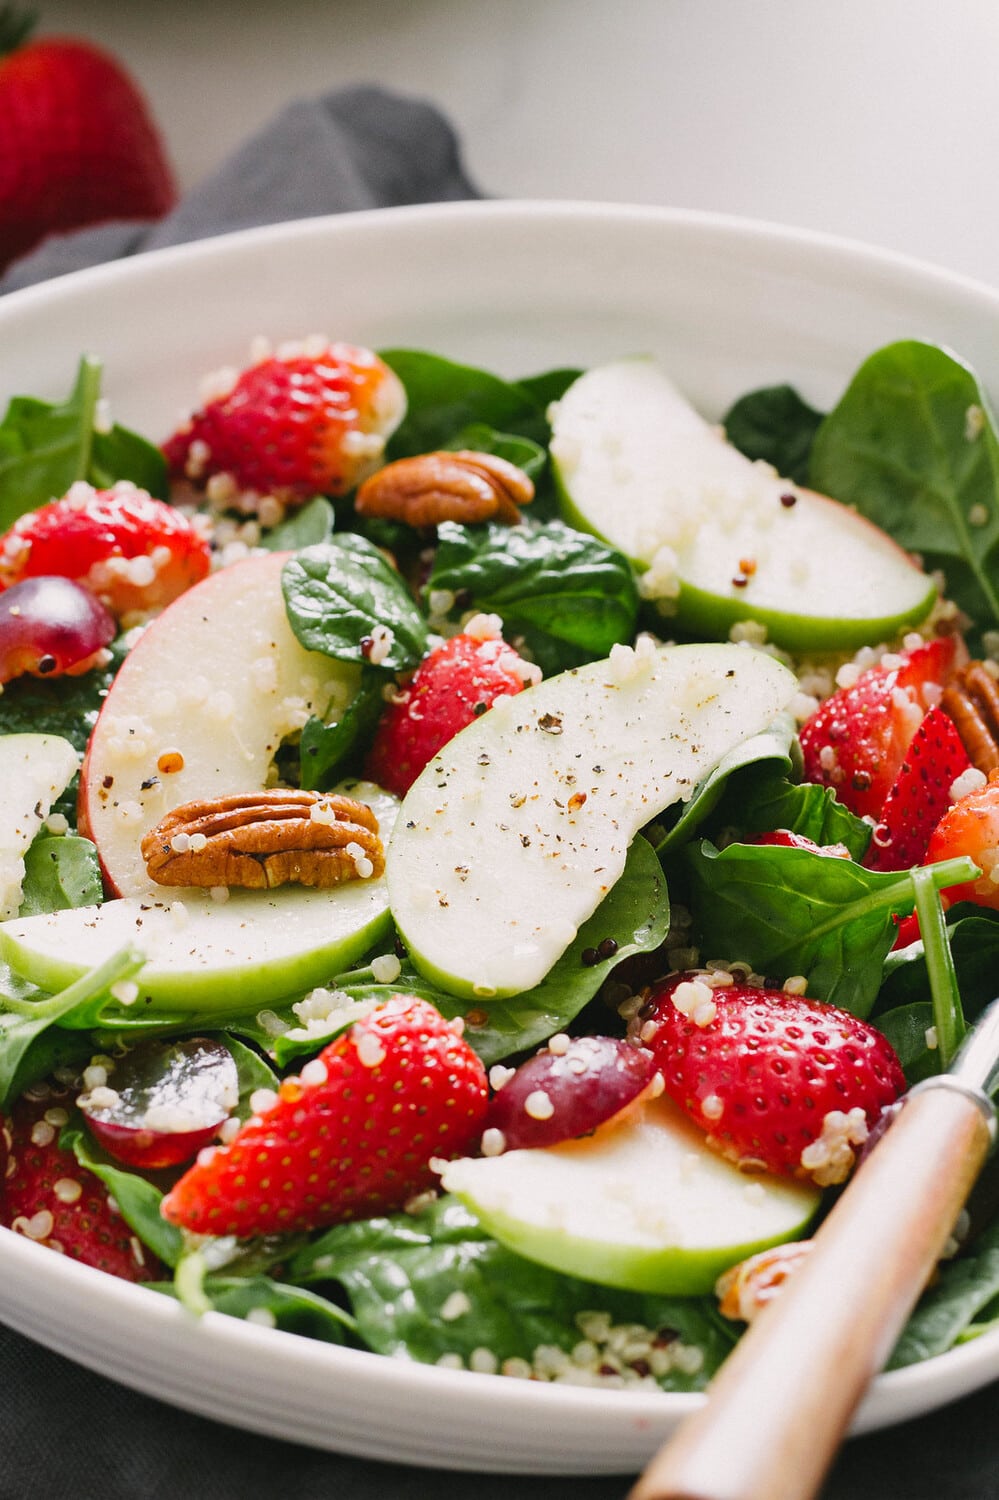 side angle view of spinach salad with strawberries, apples and quinoa.